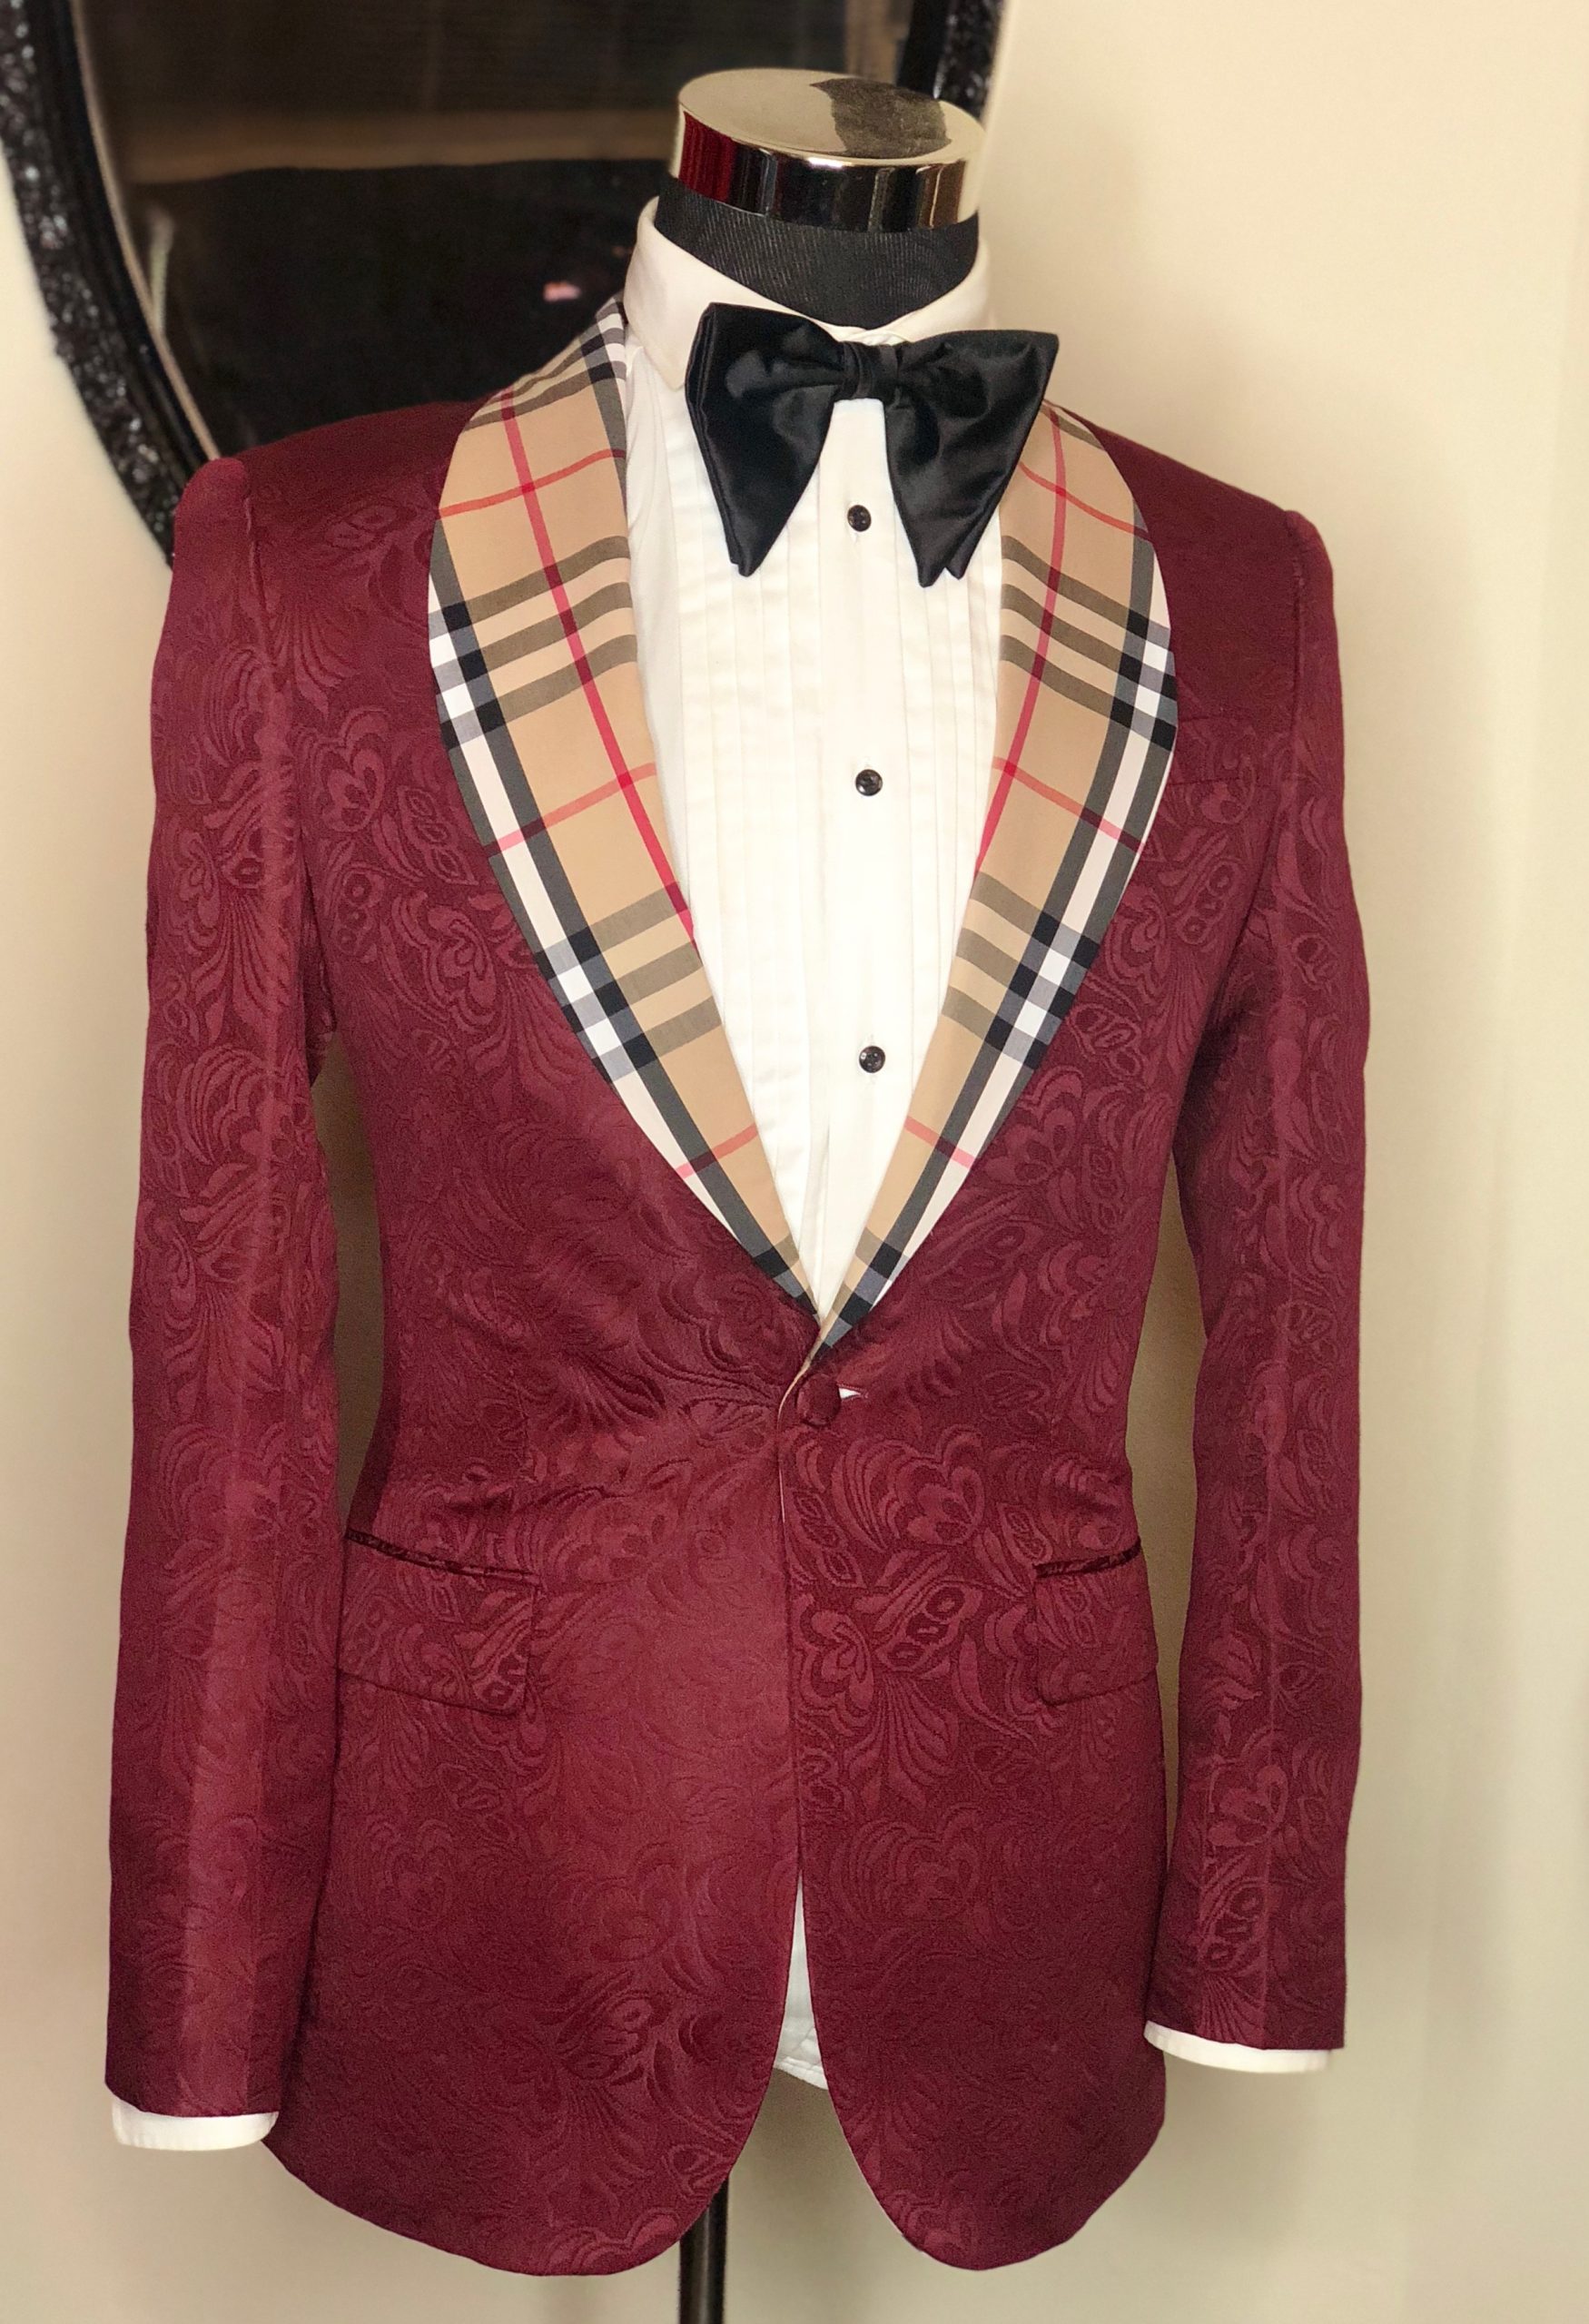 Burberry Jacquard Suit (custom in any color) - Custom Suits, Shirts Jacket